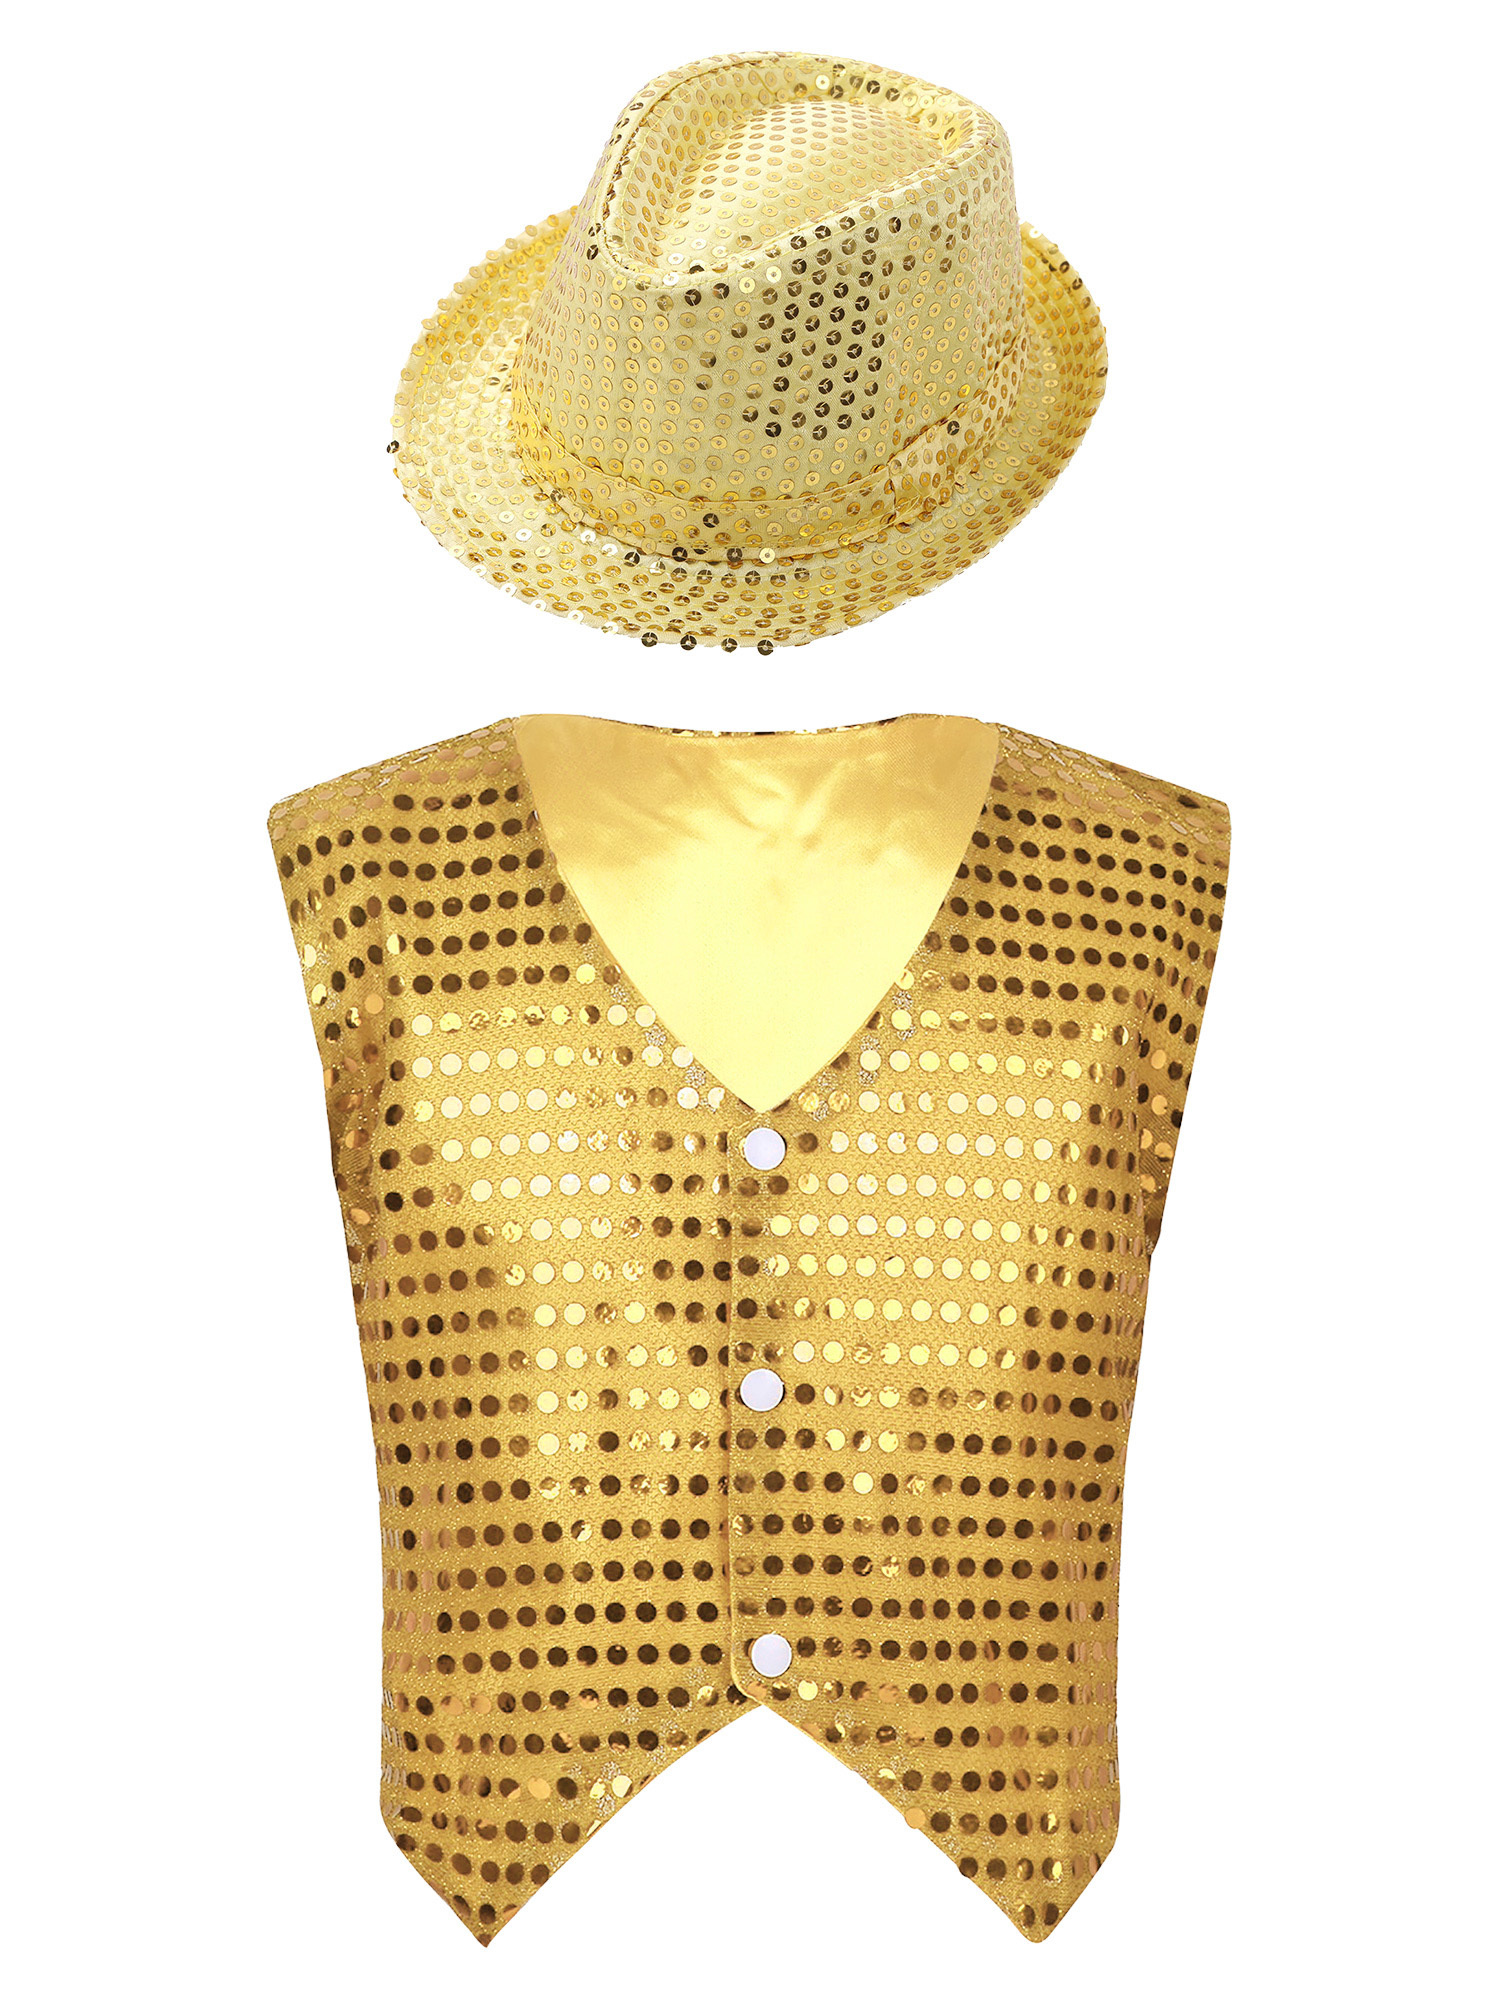 IEFIEL Kids Boys Sparkle Sequins Button Down Vest with Hat Dance Outfit Set Hip Hop Jazz Stage Performance Costume Gold 11-12 - image 1 of 7